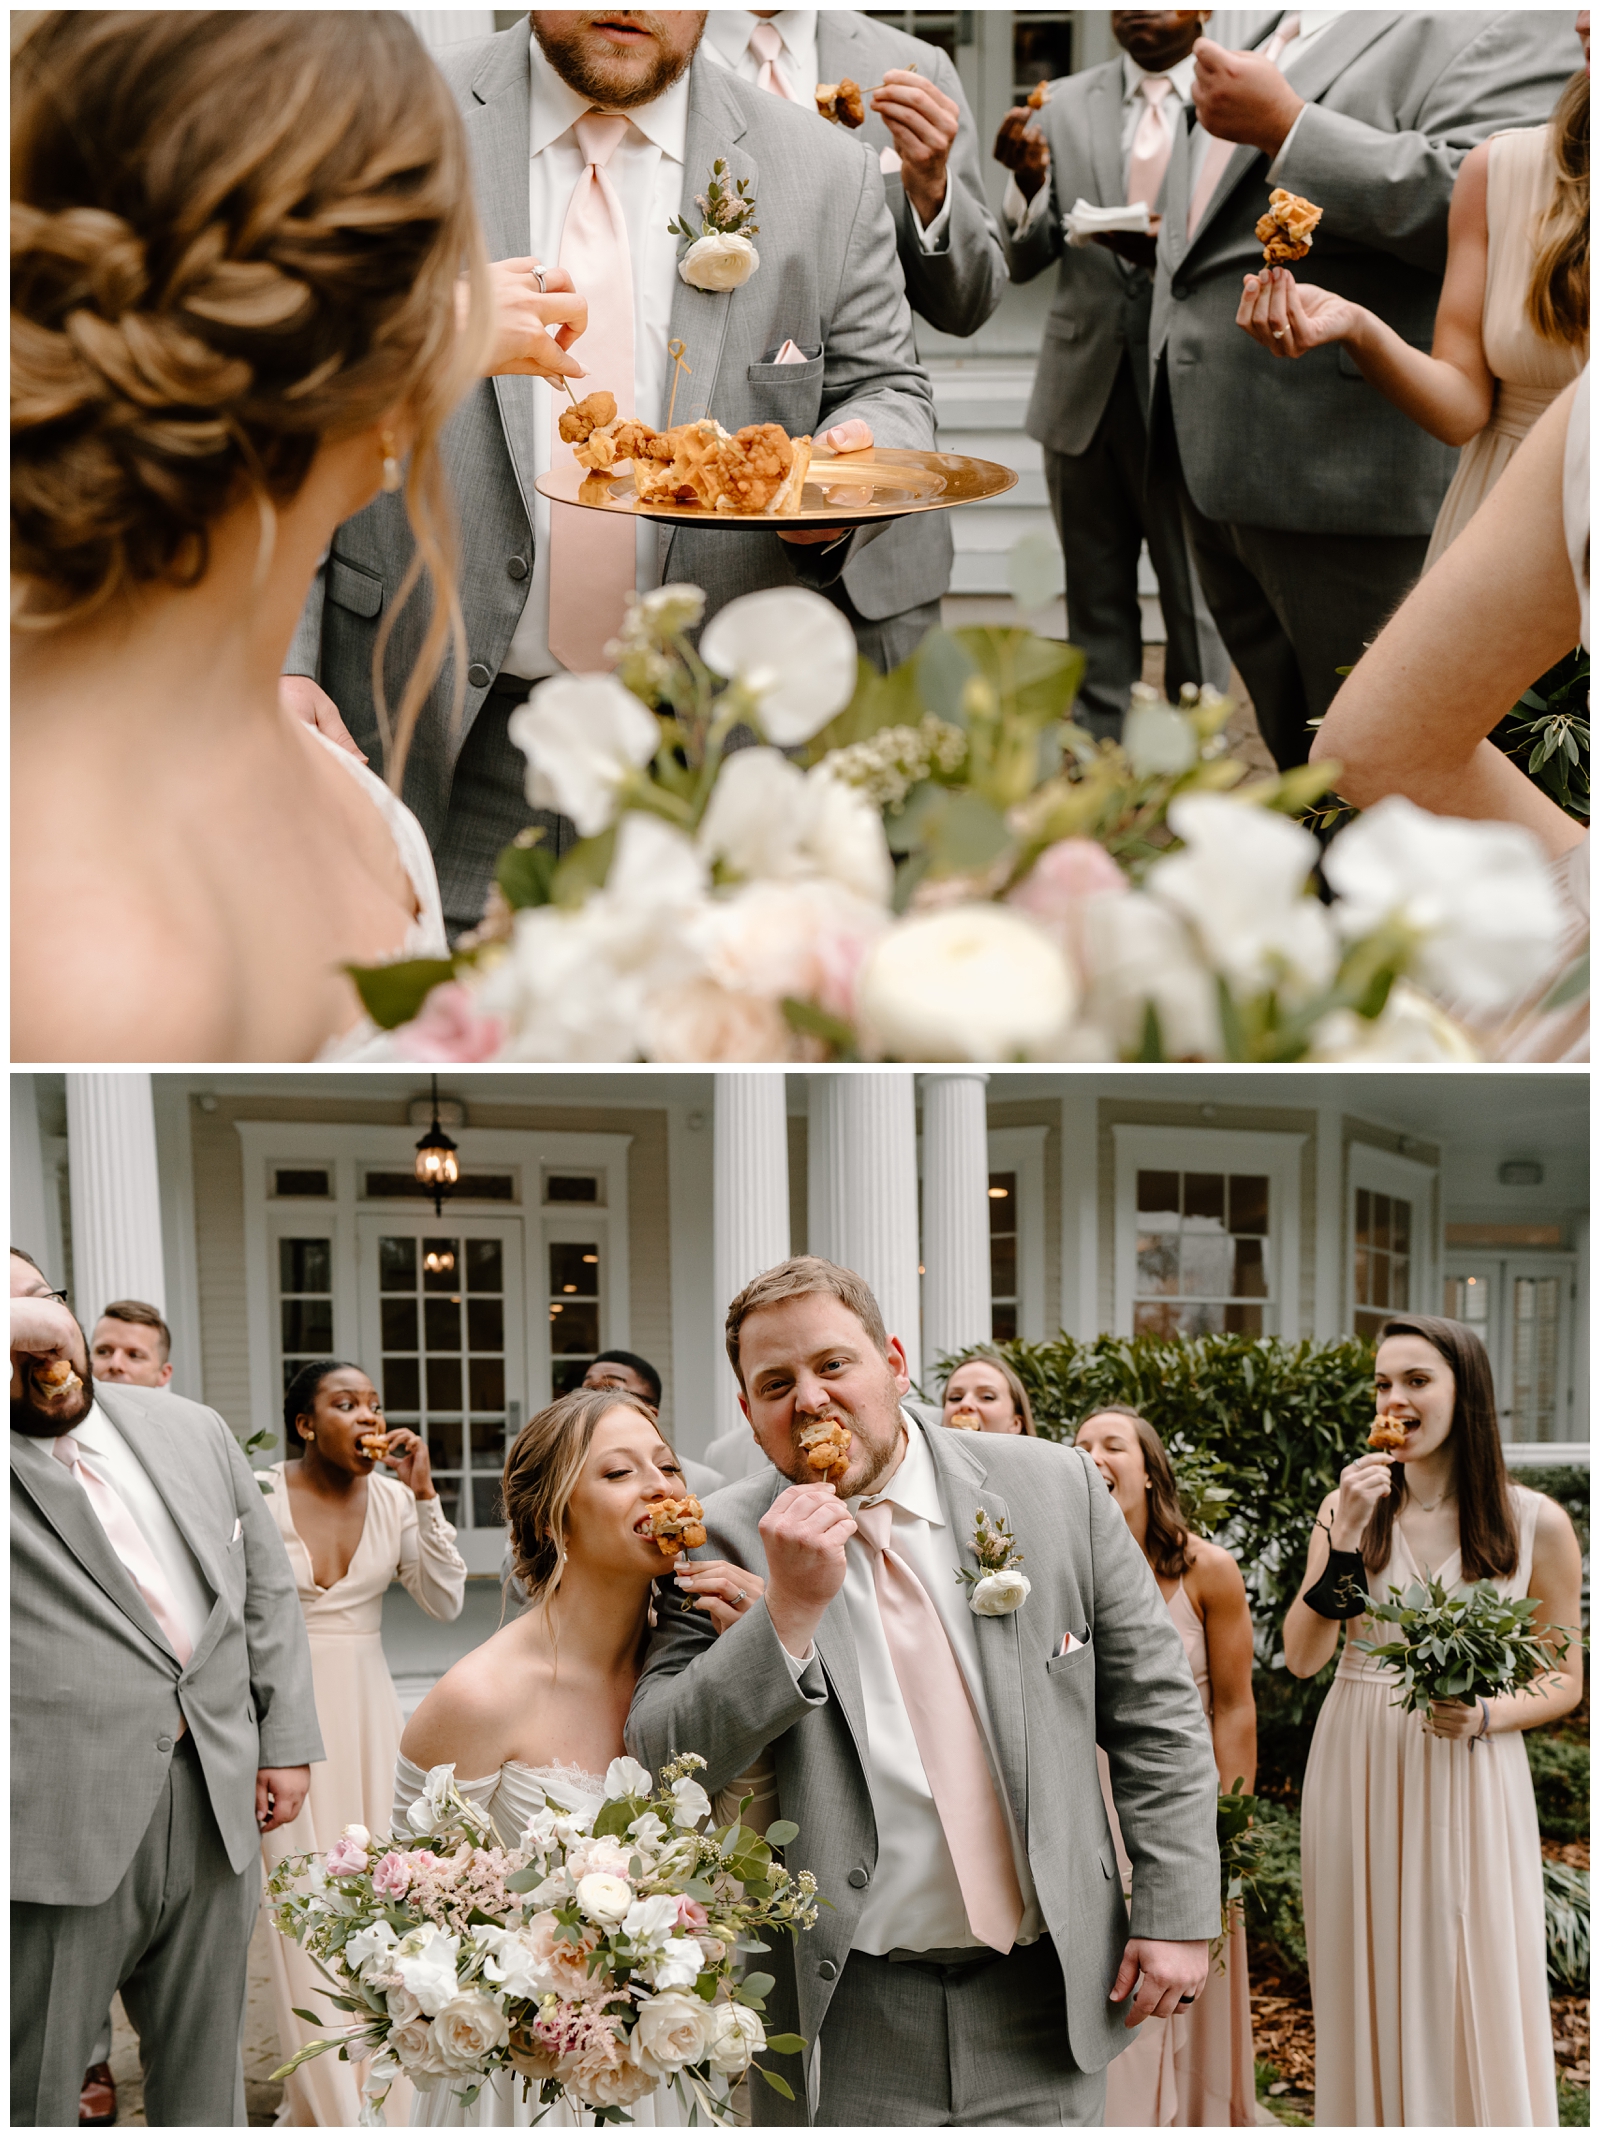 Fun wedding party photos eating Chick-Fil-A at their romantic McAlister-Leftwich wedding in downtown Greensboro by NC wedding photographer